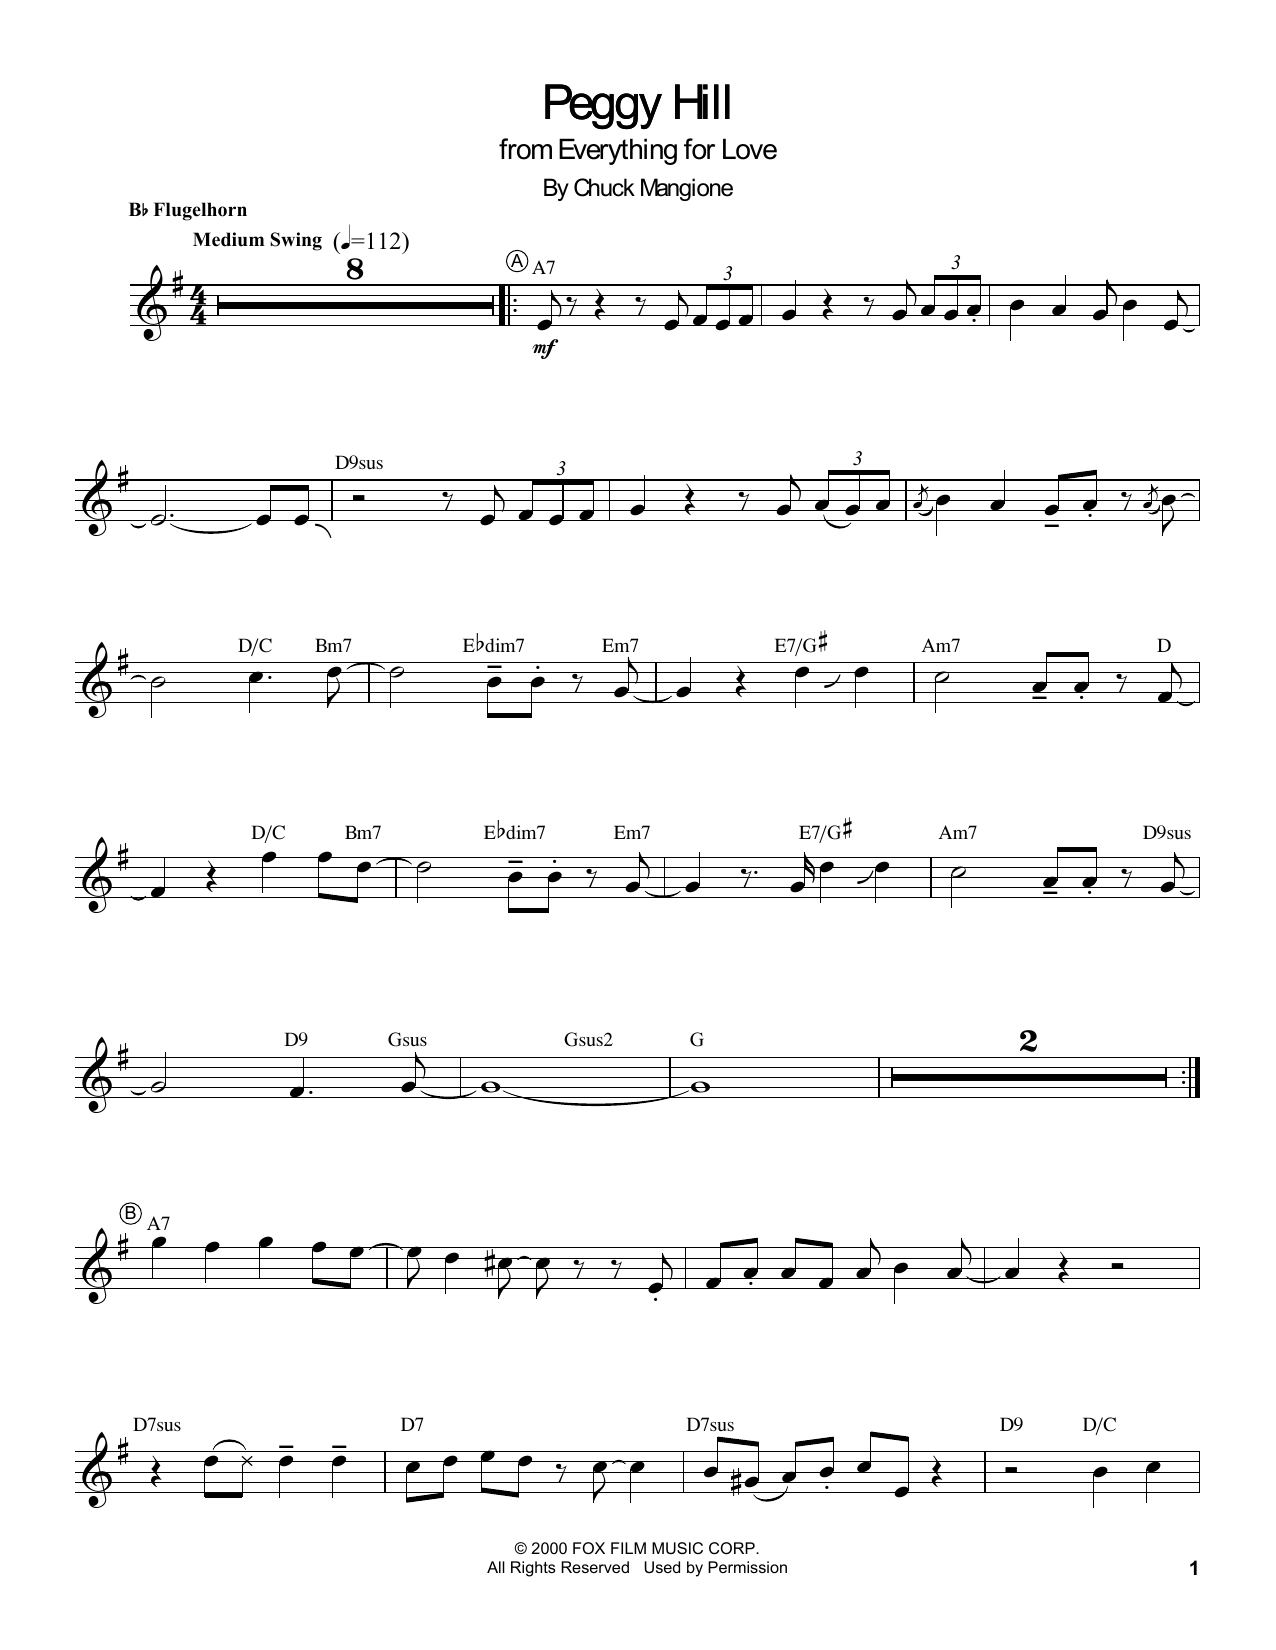 Download Chuck Mangione Peggy Hill Sheet Music